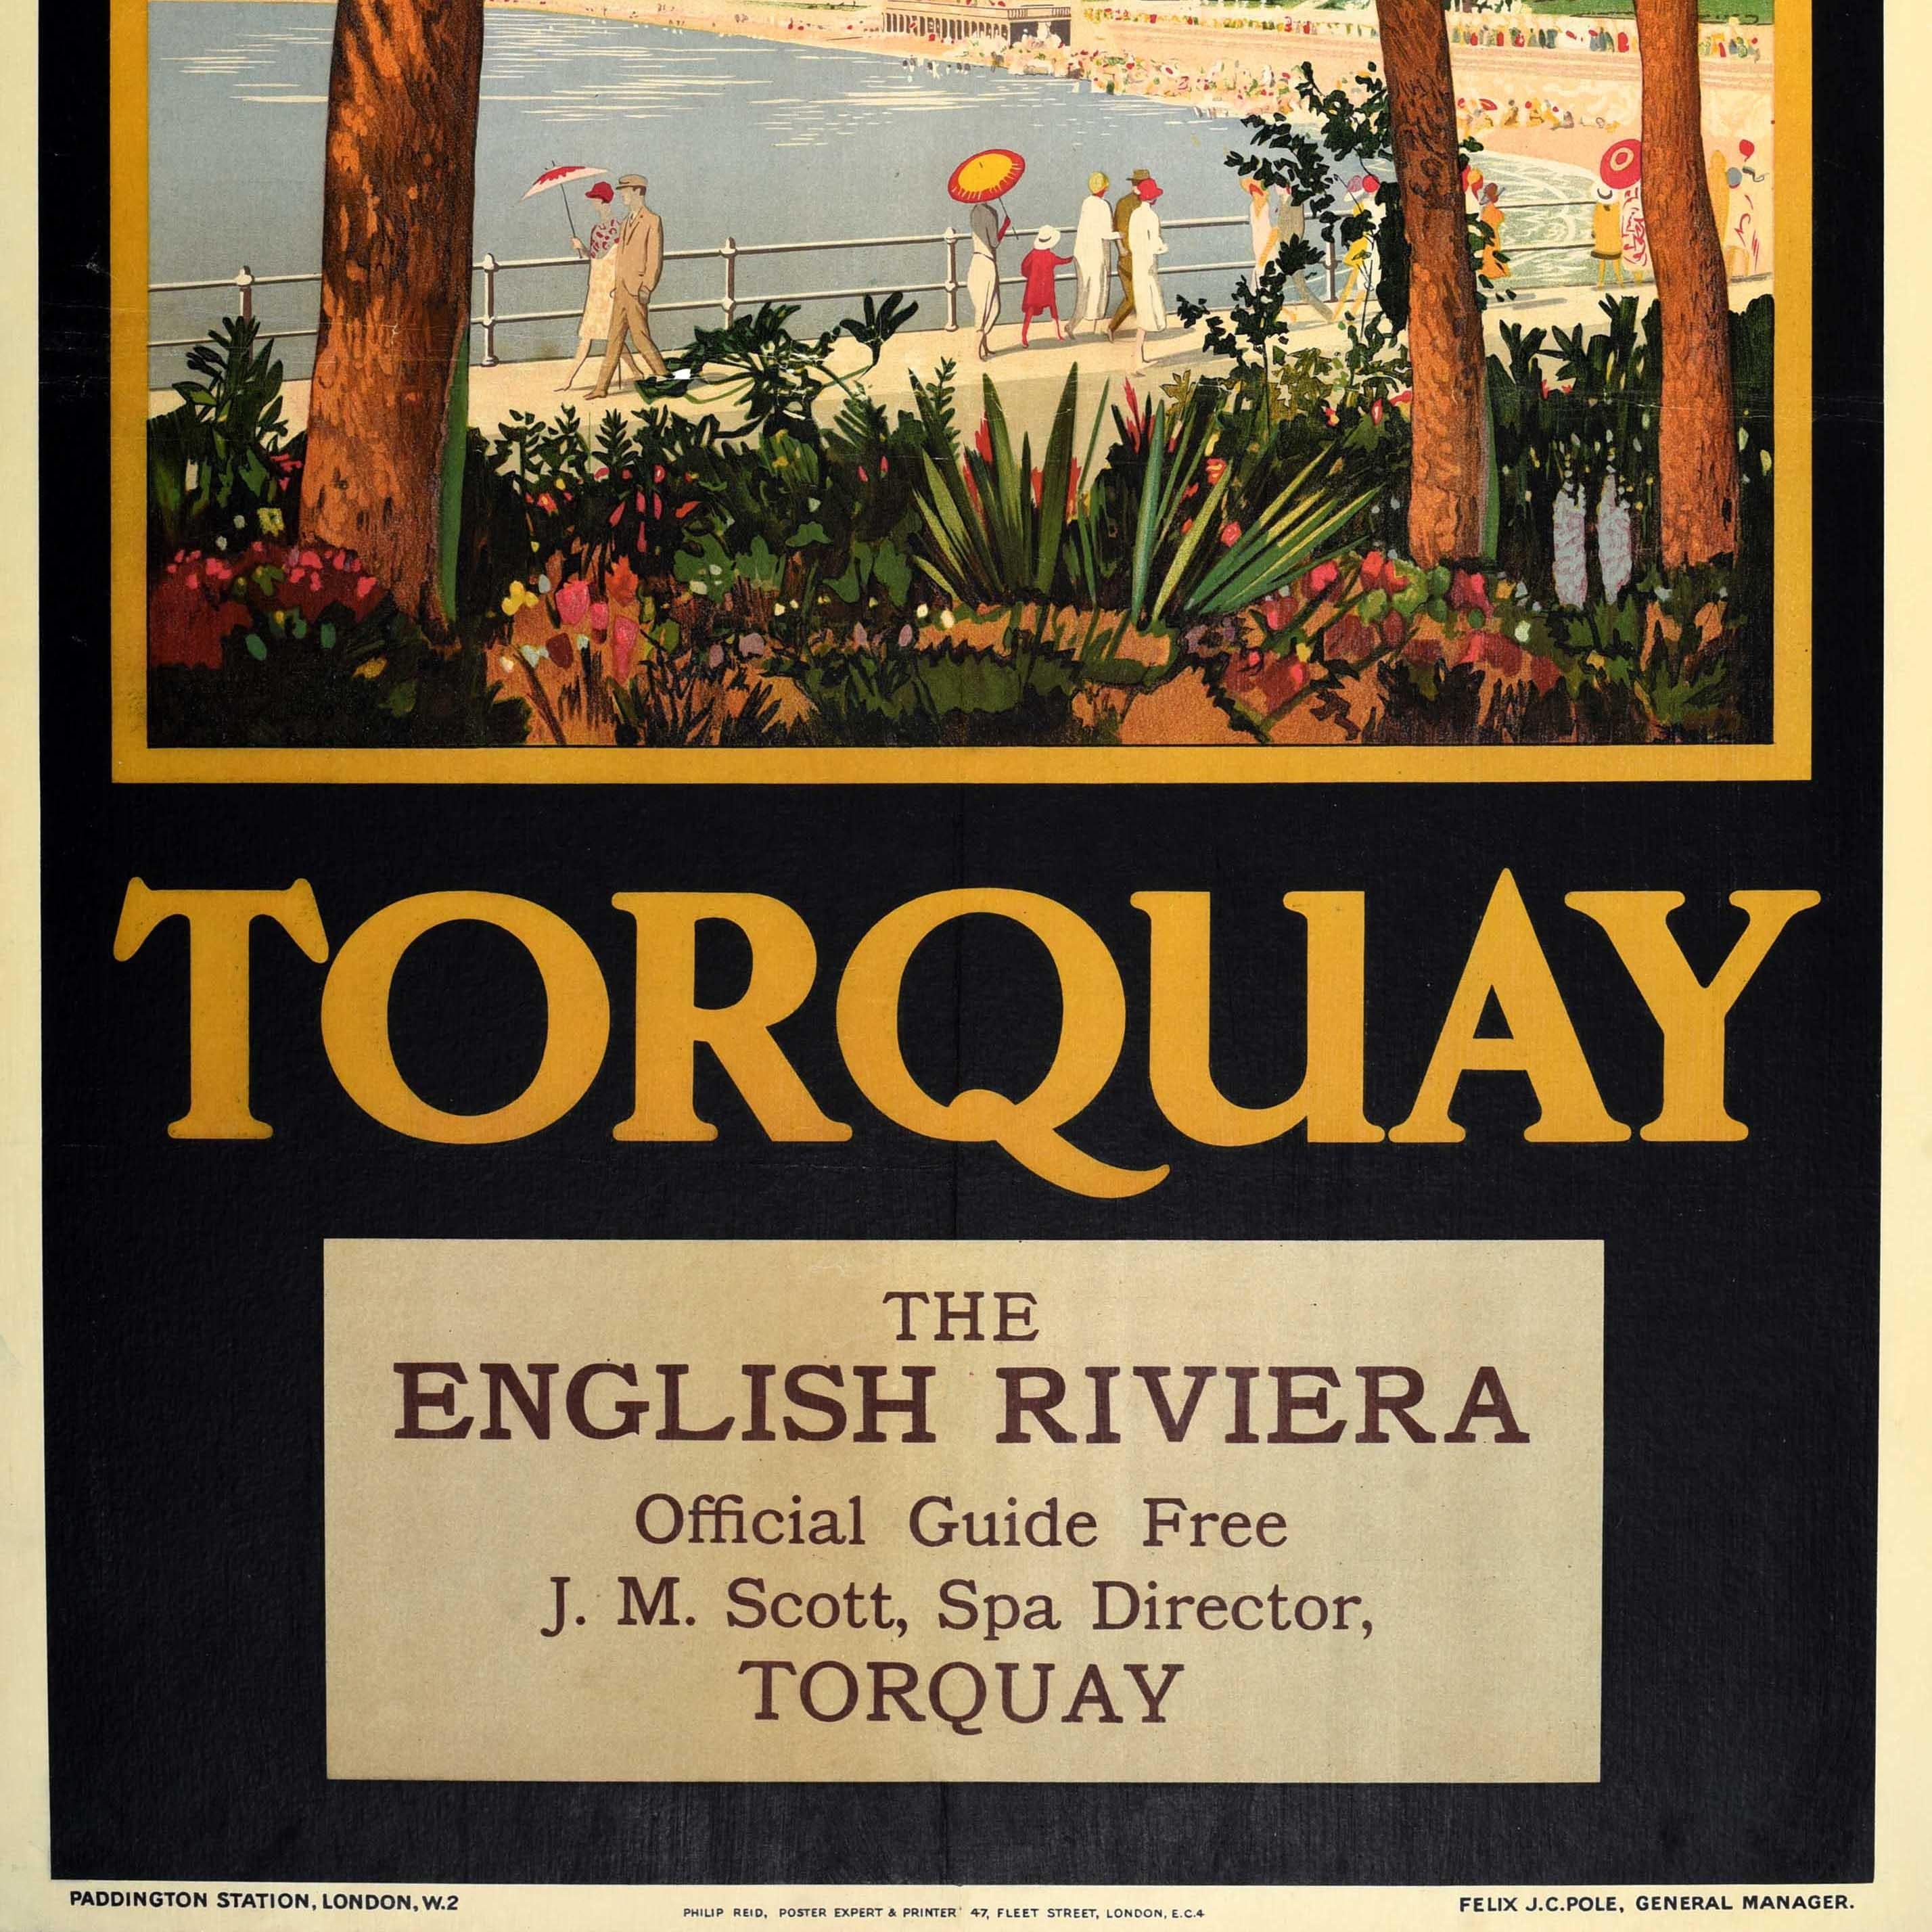 Original vintage Great Western Railway poster for Torquay The English Riviera featuring great artwork showing smartly dressed people walking along the promenade including couples and families and ladies holding colourful parasols in front of a